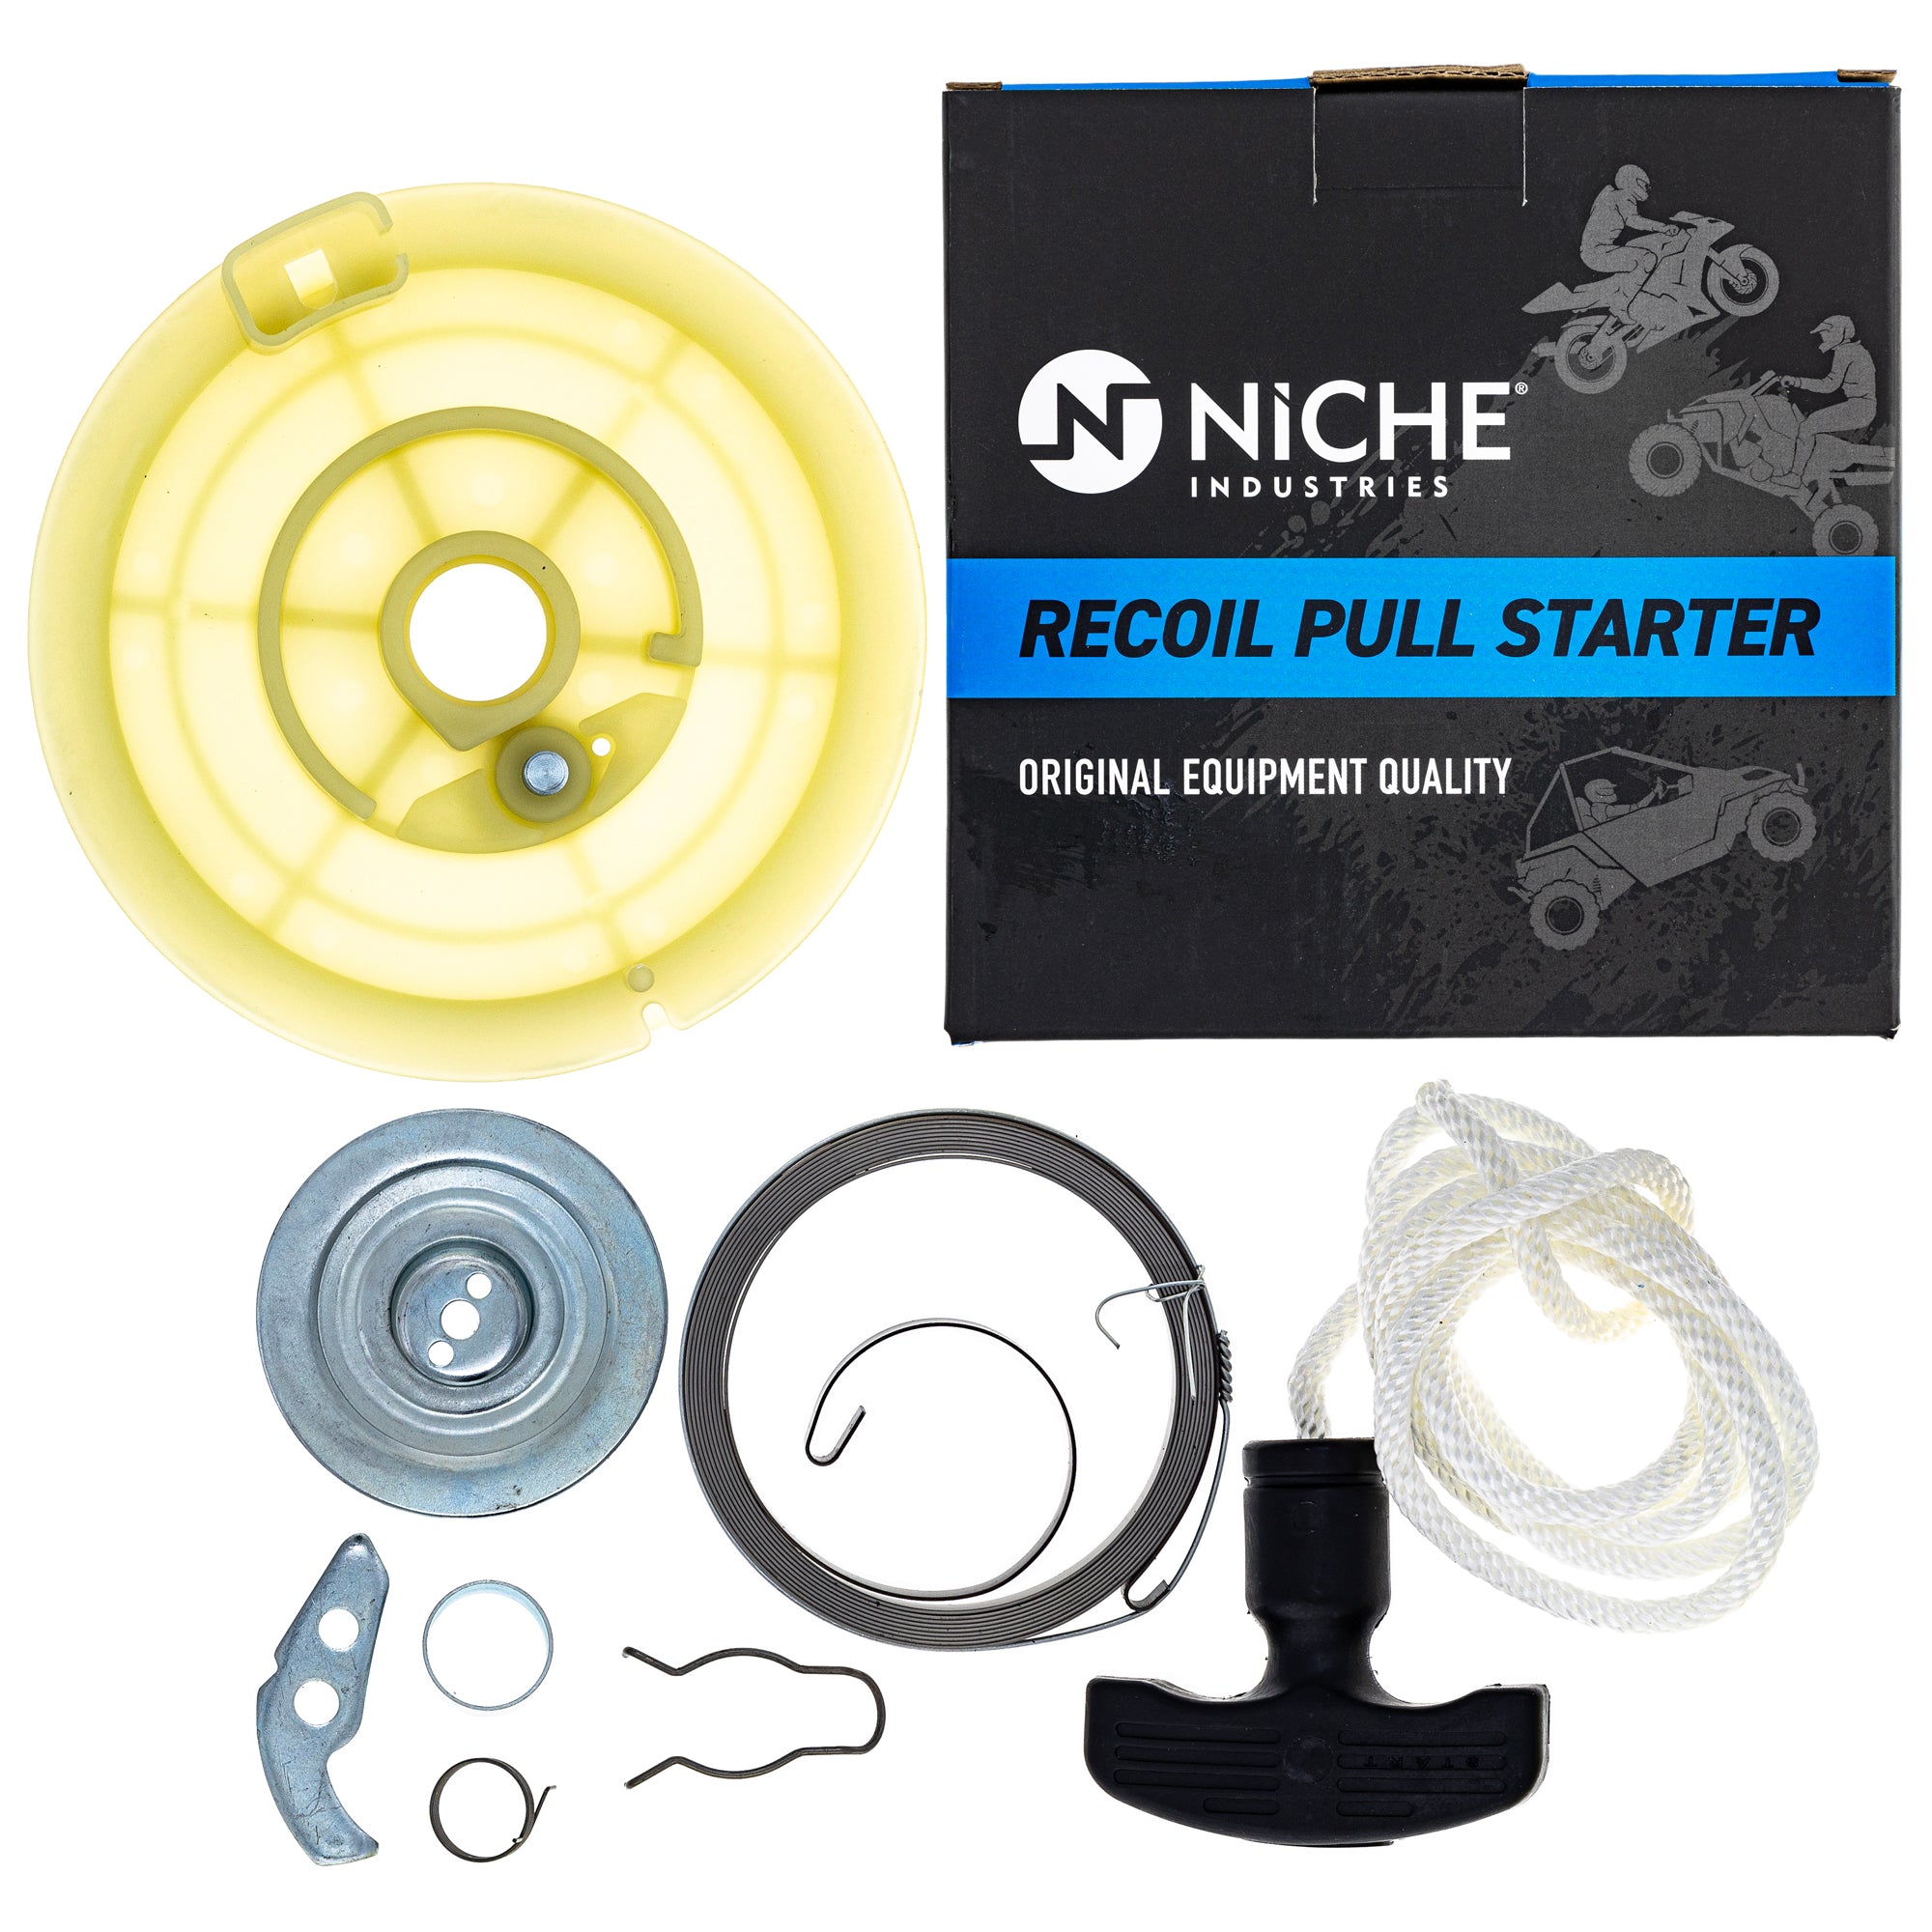 NICHE 519-CRS2223A Recoil Pull-Starter Assembly for Polaris Xpress